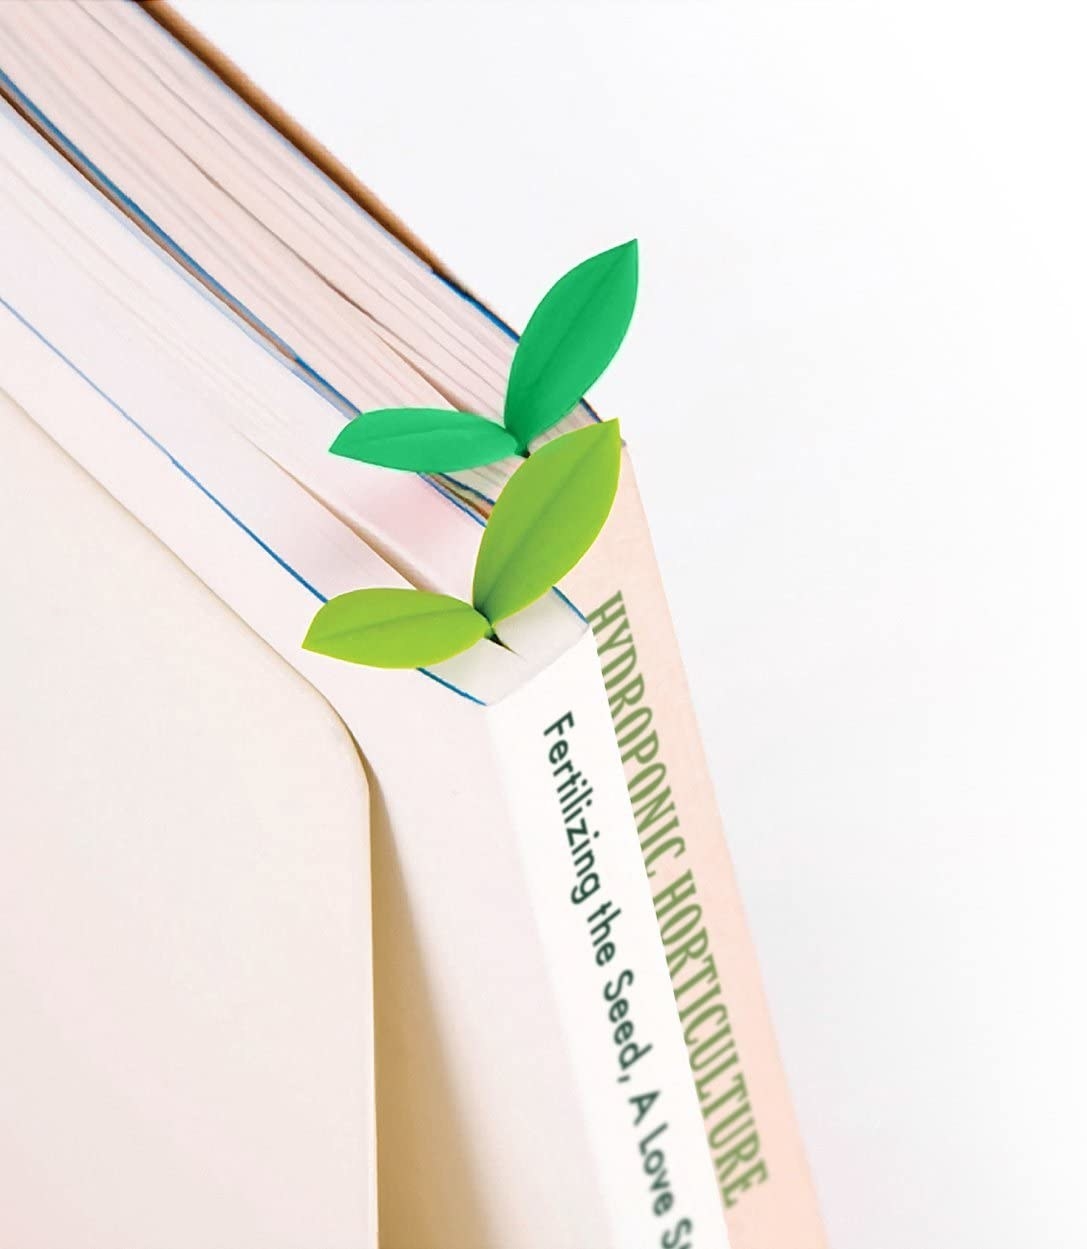 A set of small sprout bookmarks peeking out of books